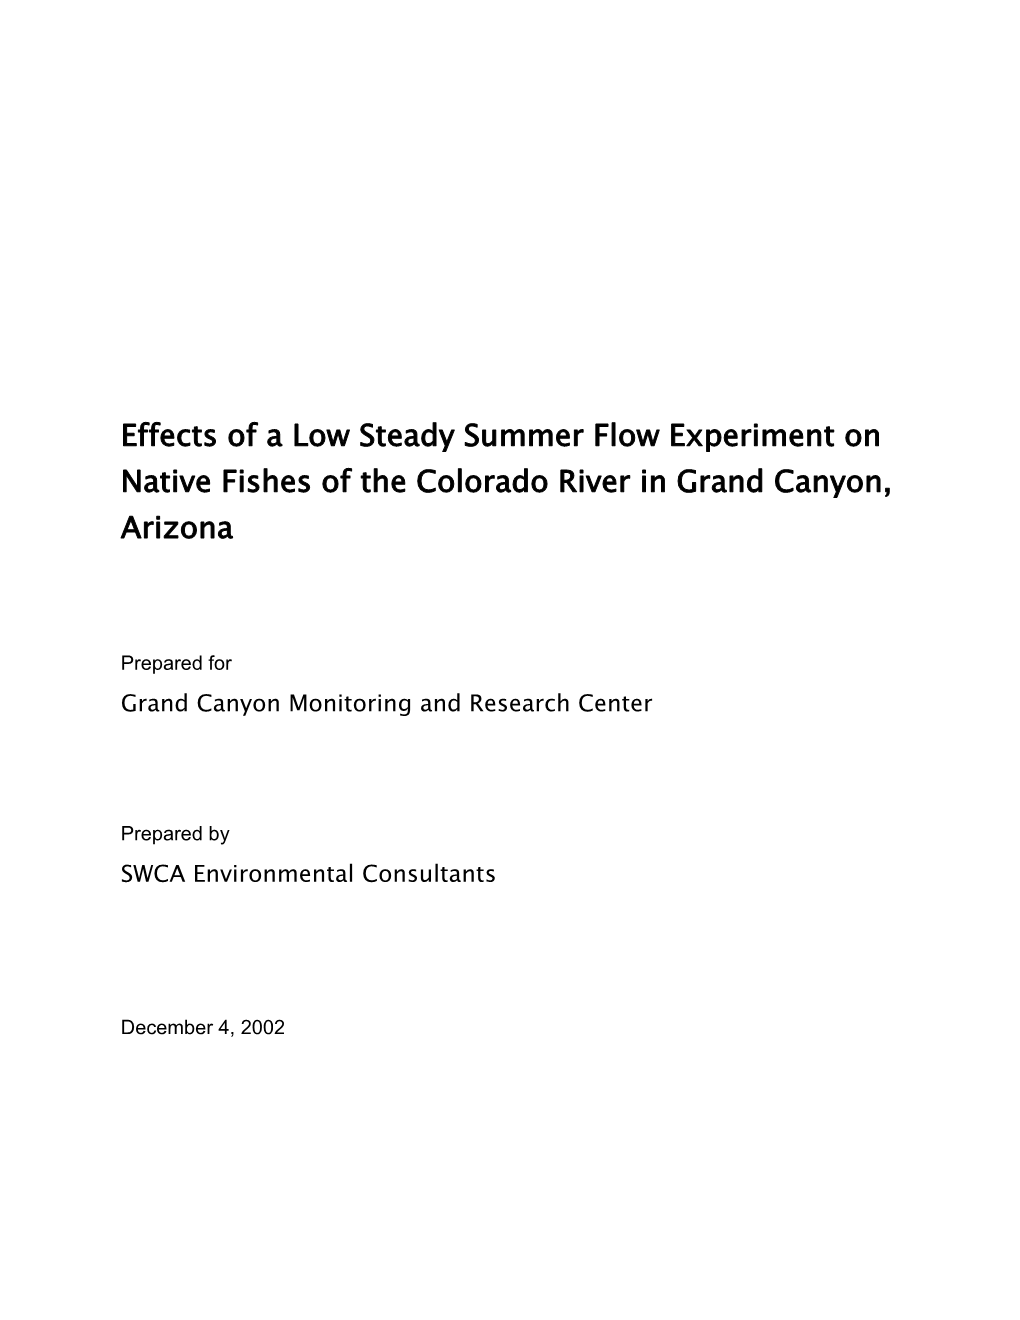 Effects of a Low Steady Summer Flow Experiment on Native Fishes of the Colorado River In